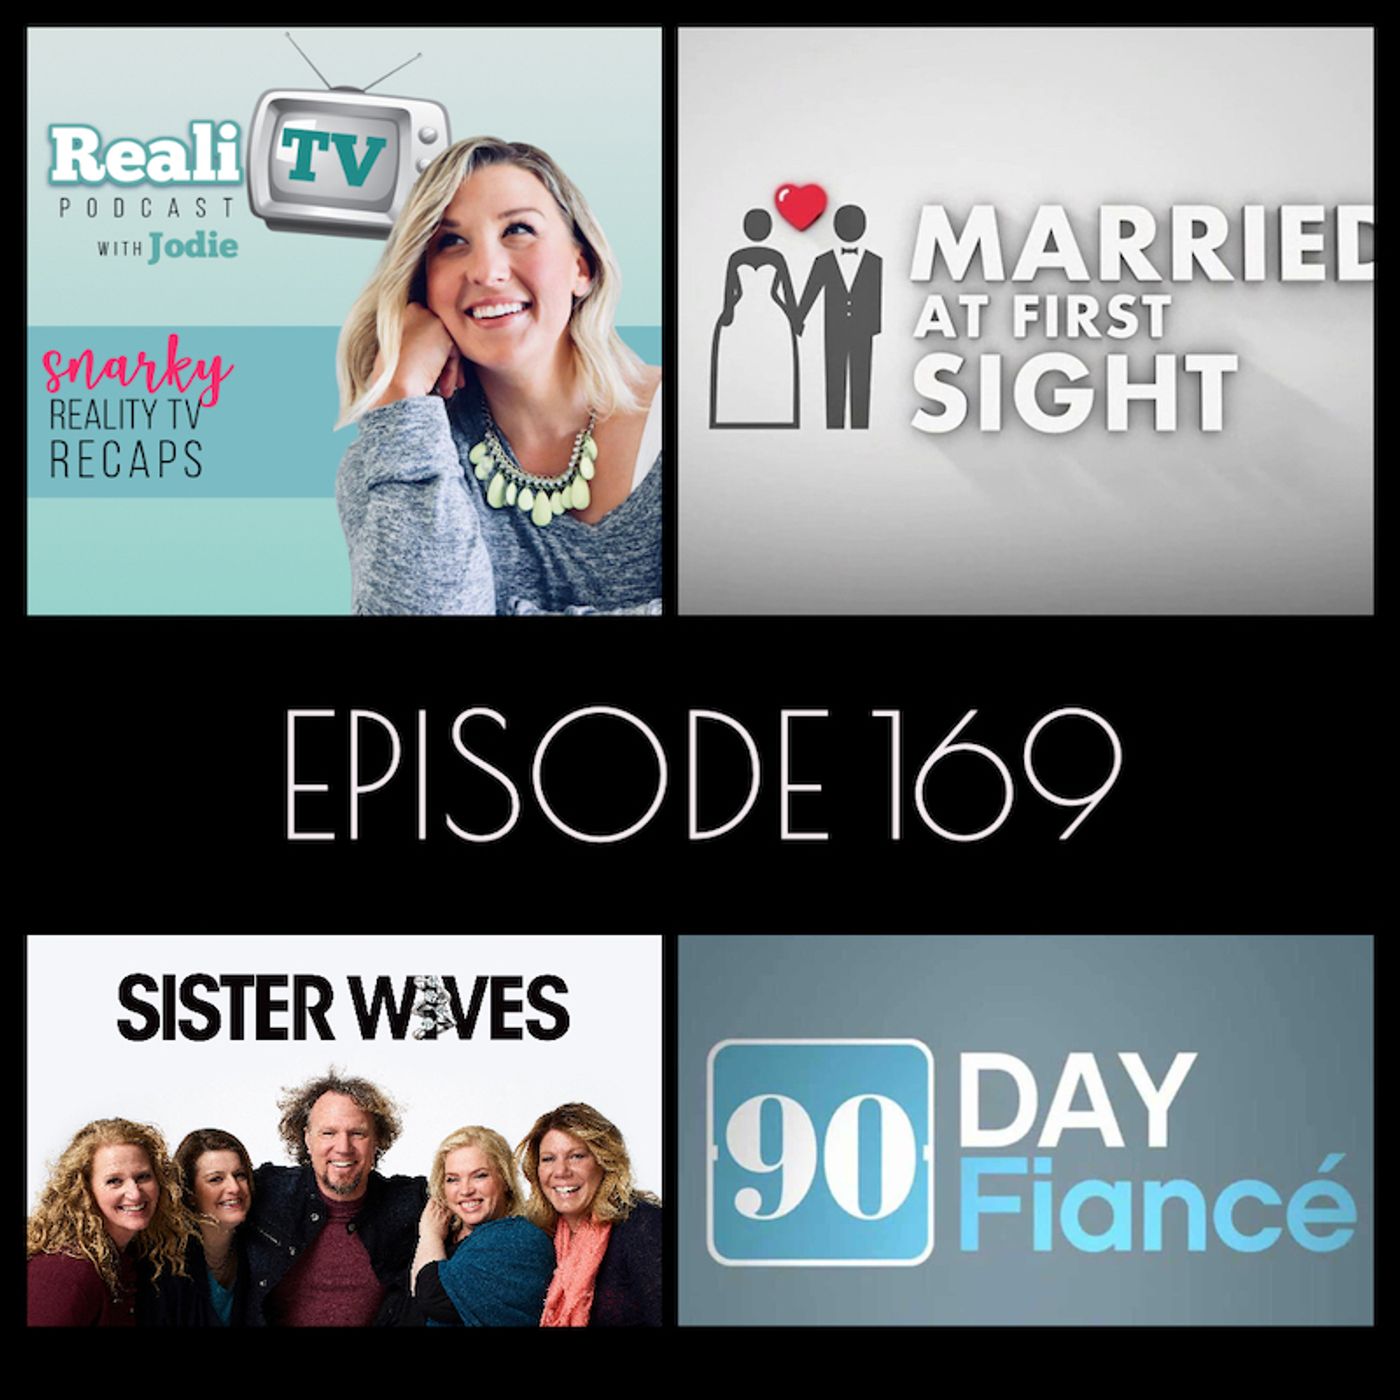 169: Married at First Sight, 90 Day Fiance & Sister Wives